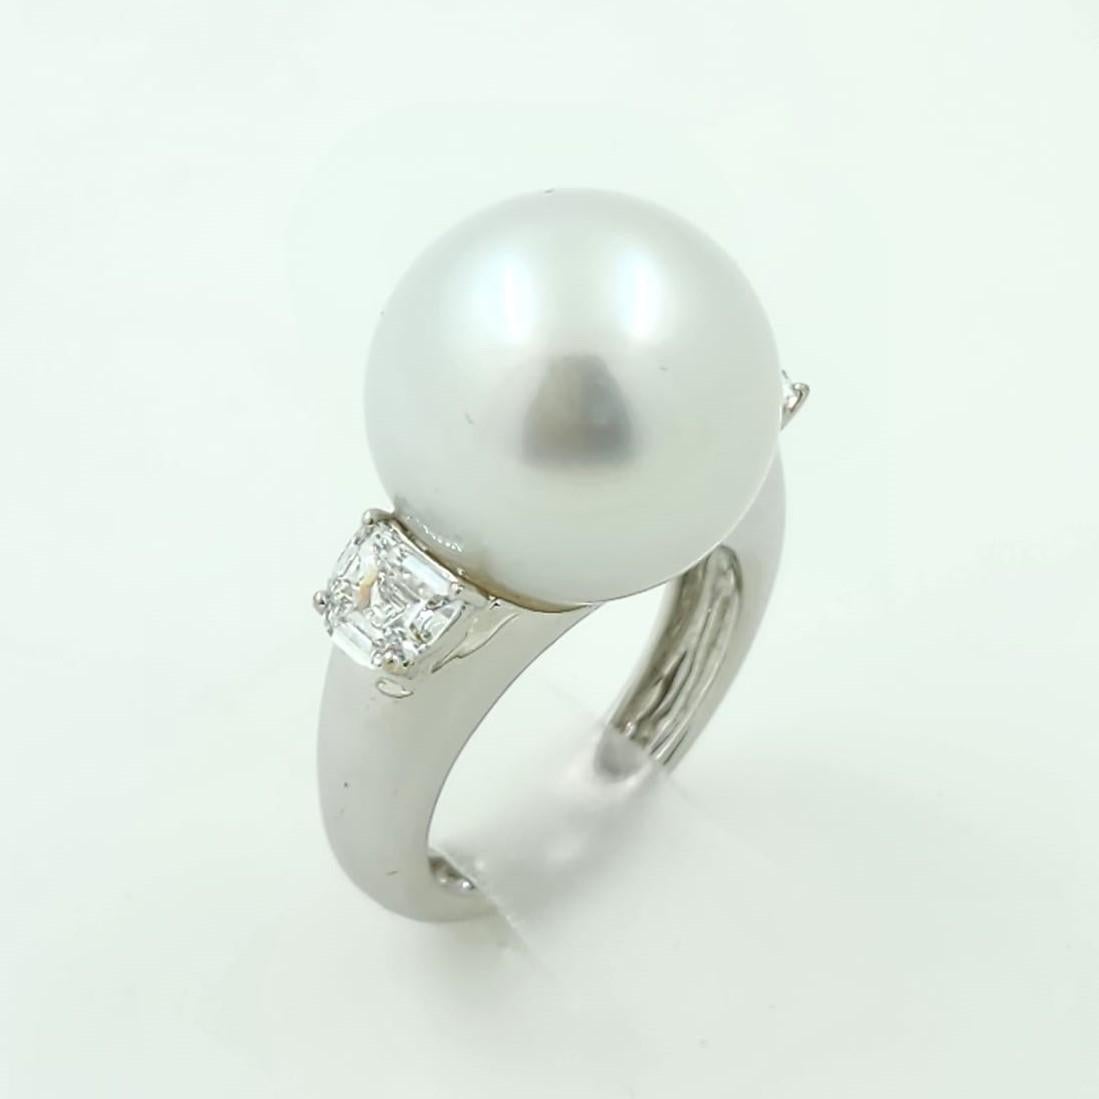 This exquisite piece of jewelry is a statement of luxury and refinement. The ring features a prominent white South Sea pearl, measuring a substantial 15.5mm, which is a size that denotes a high-quality gem. South Sea pearls are among the most